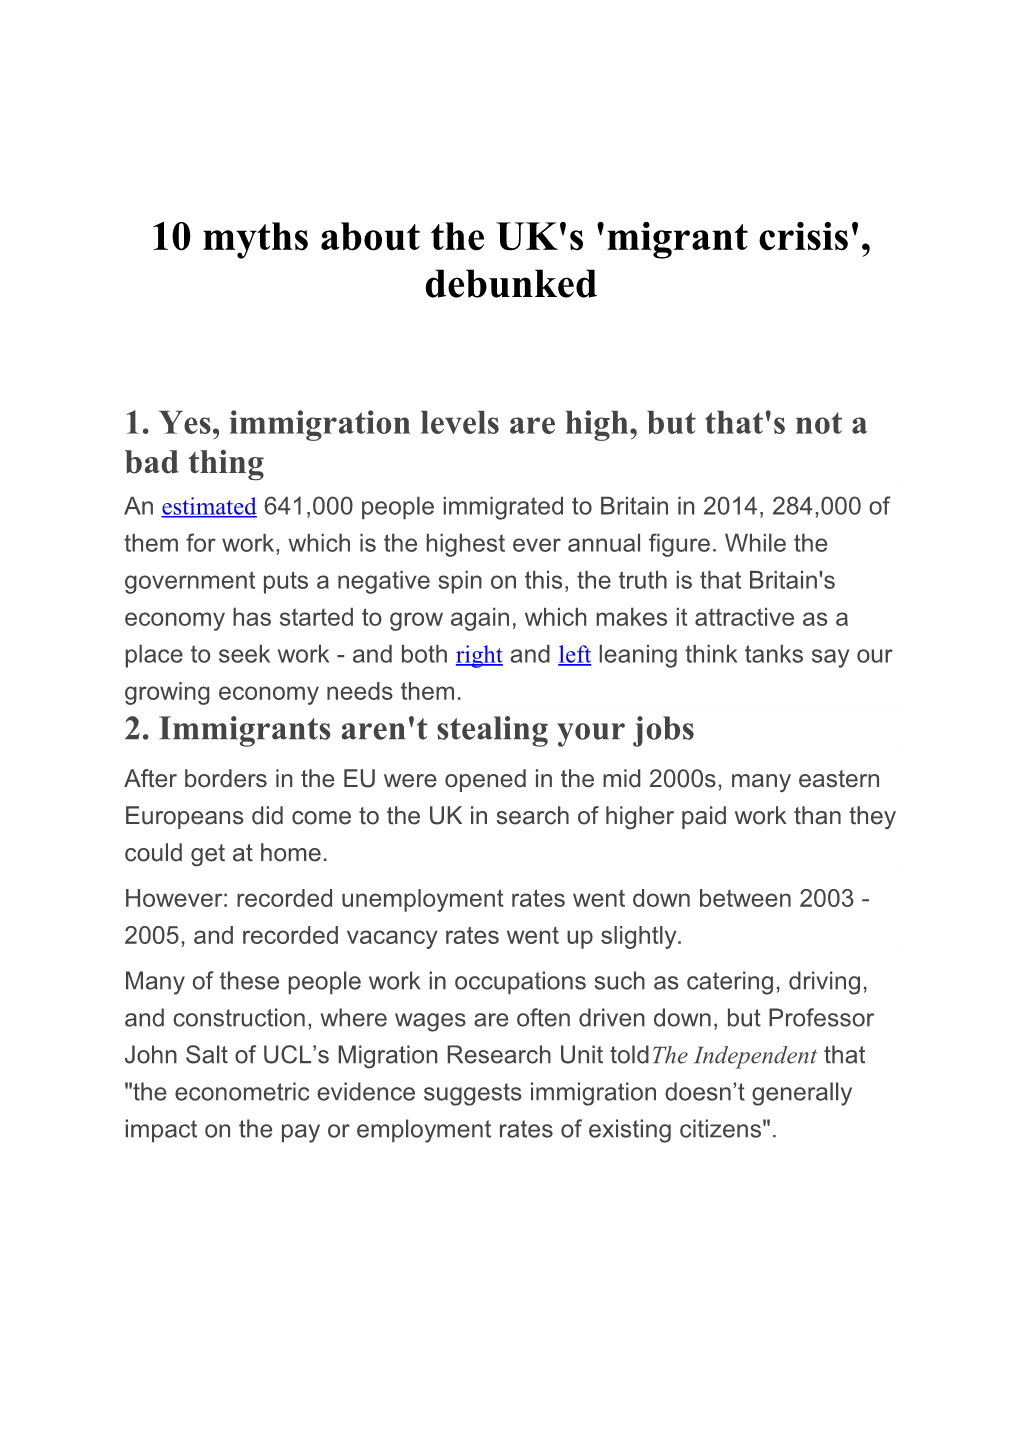 10 Myths About the UK's 'Migrant Crisis', Debunked